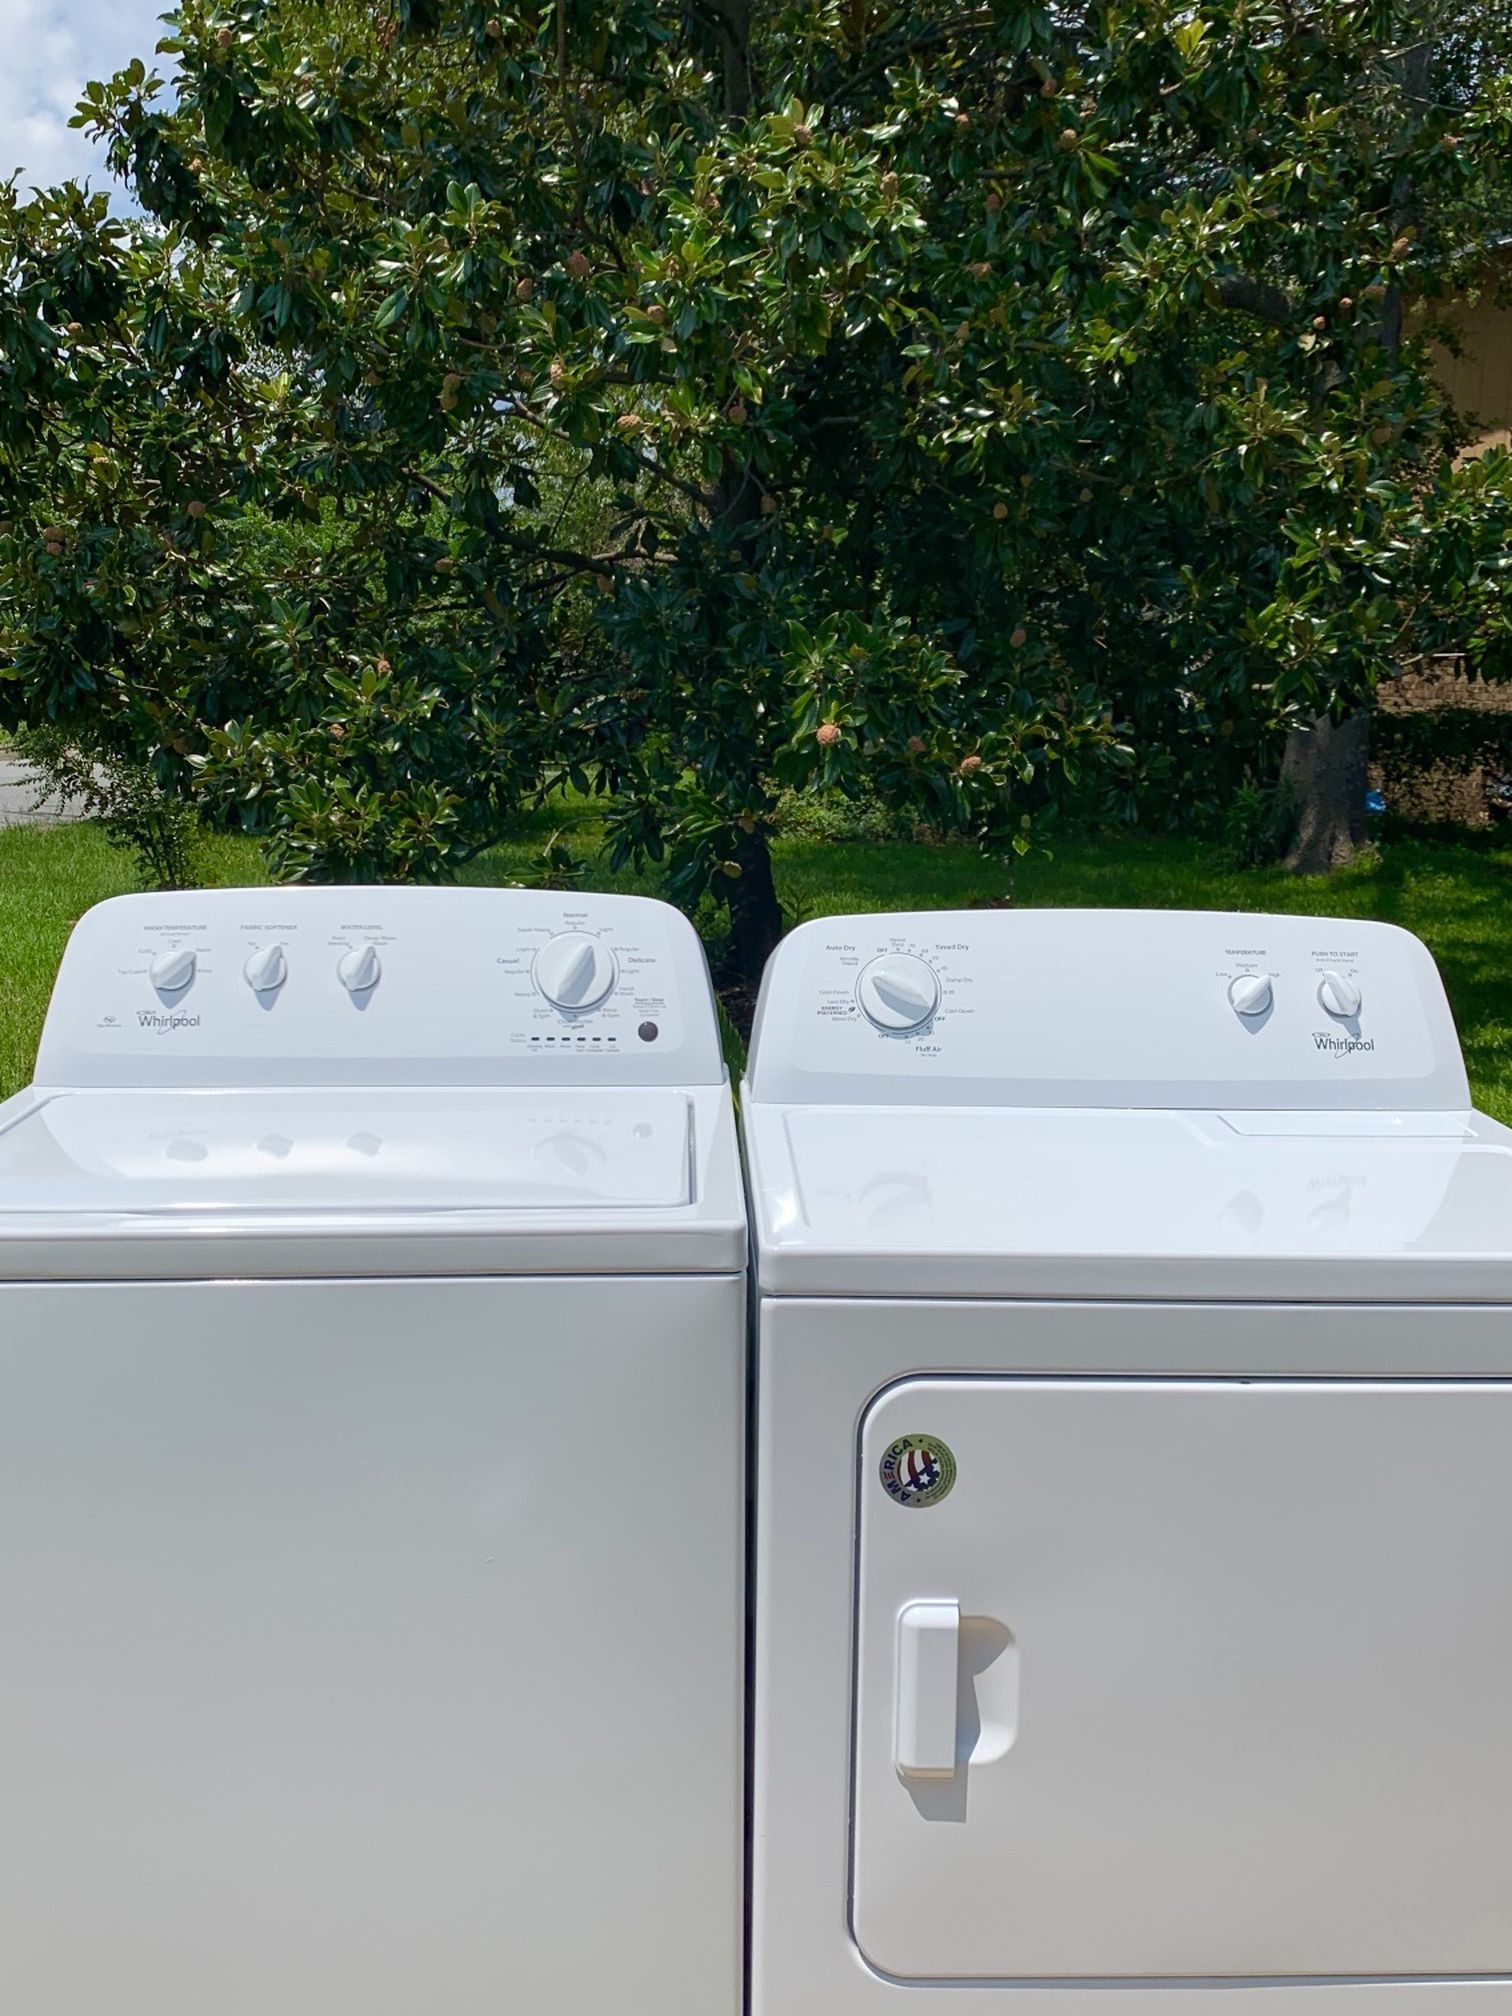 🌊 Barely Used Eco🍃Matching Whirlpool Washer&Dryer Set Available 🌊